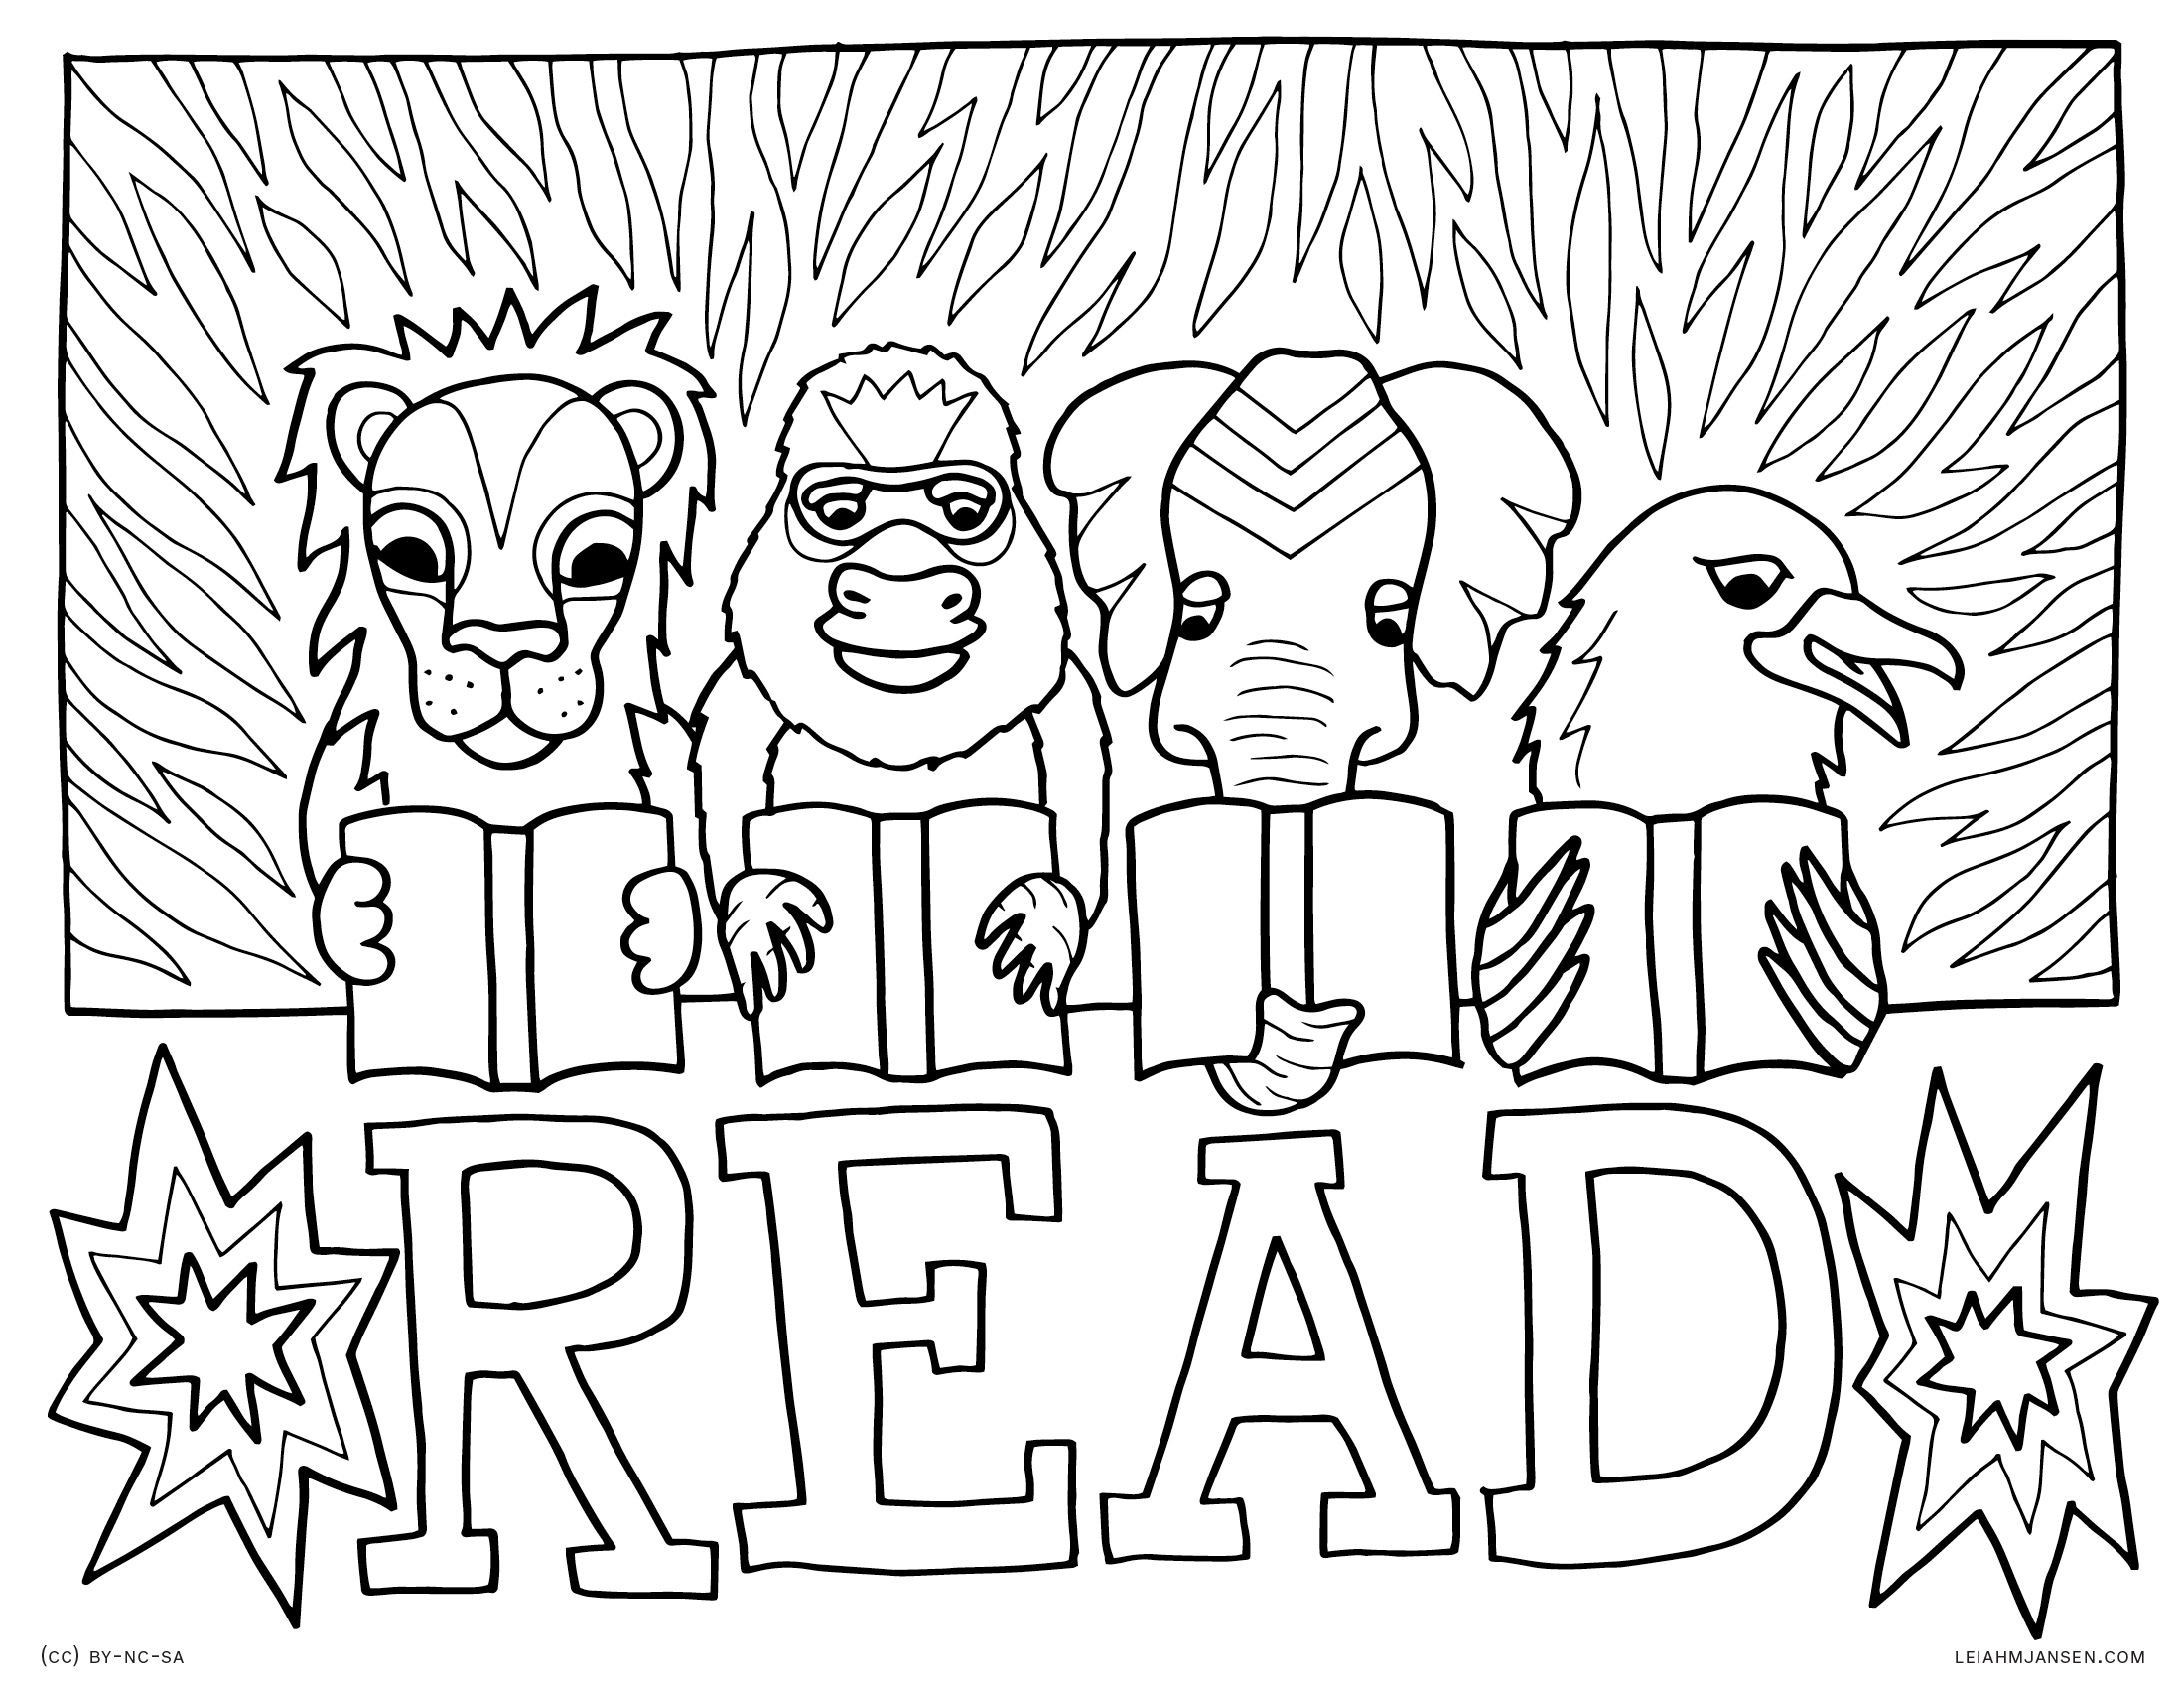 Happy National Coloring Book Day! – We Are Creed